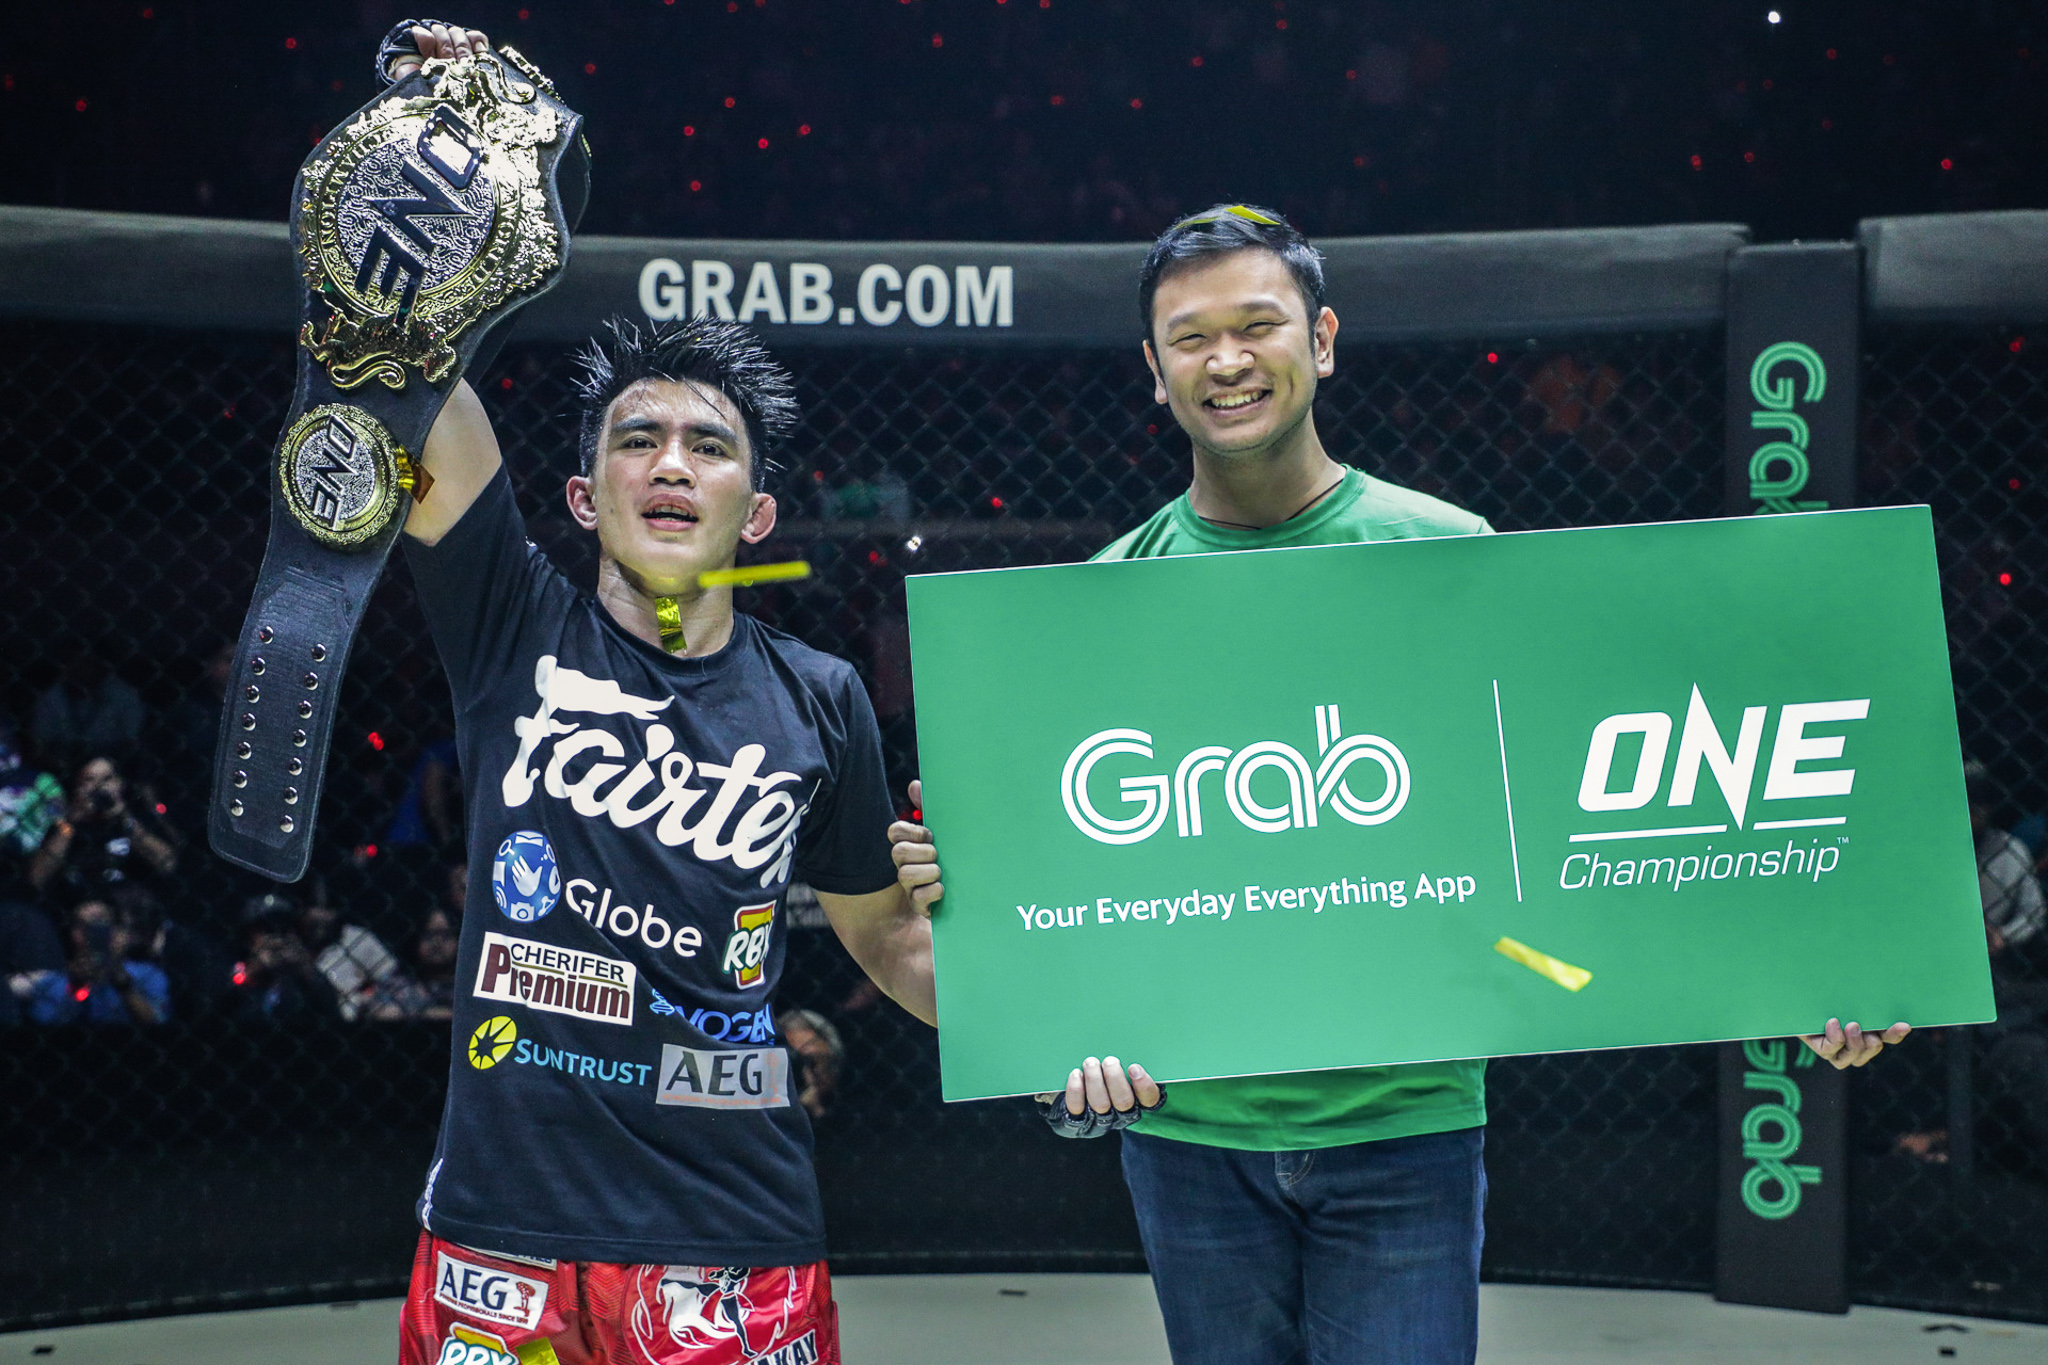 At 24, Pacio confident he can defend ONE title multiple times